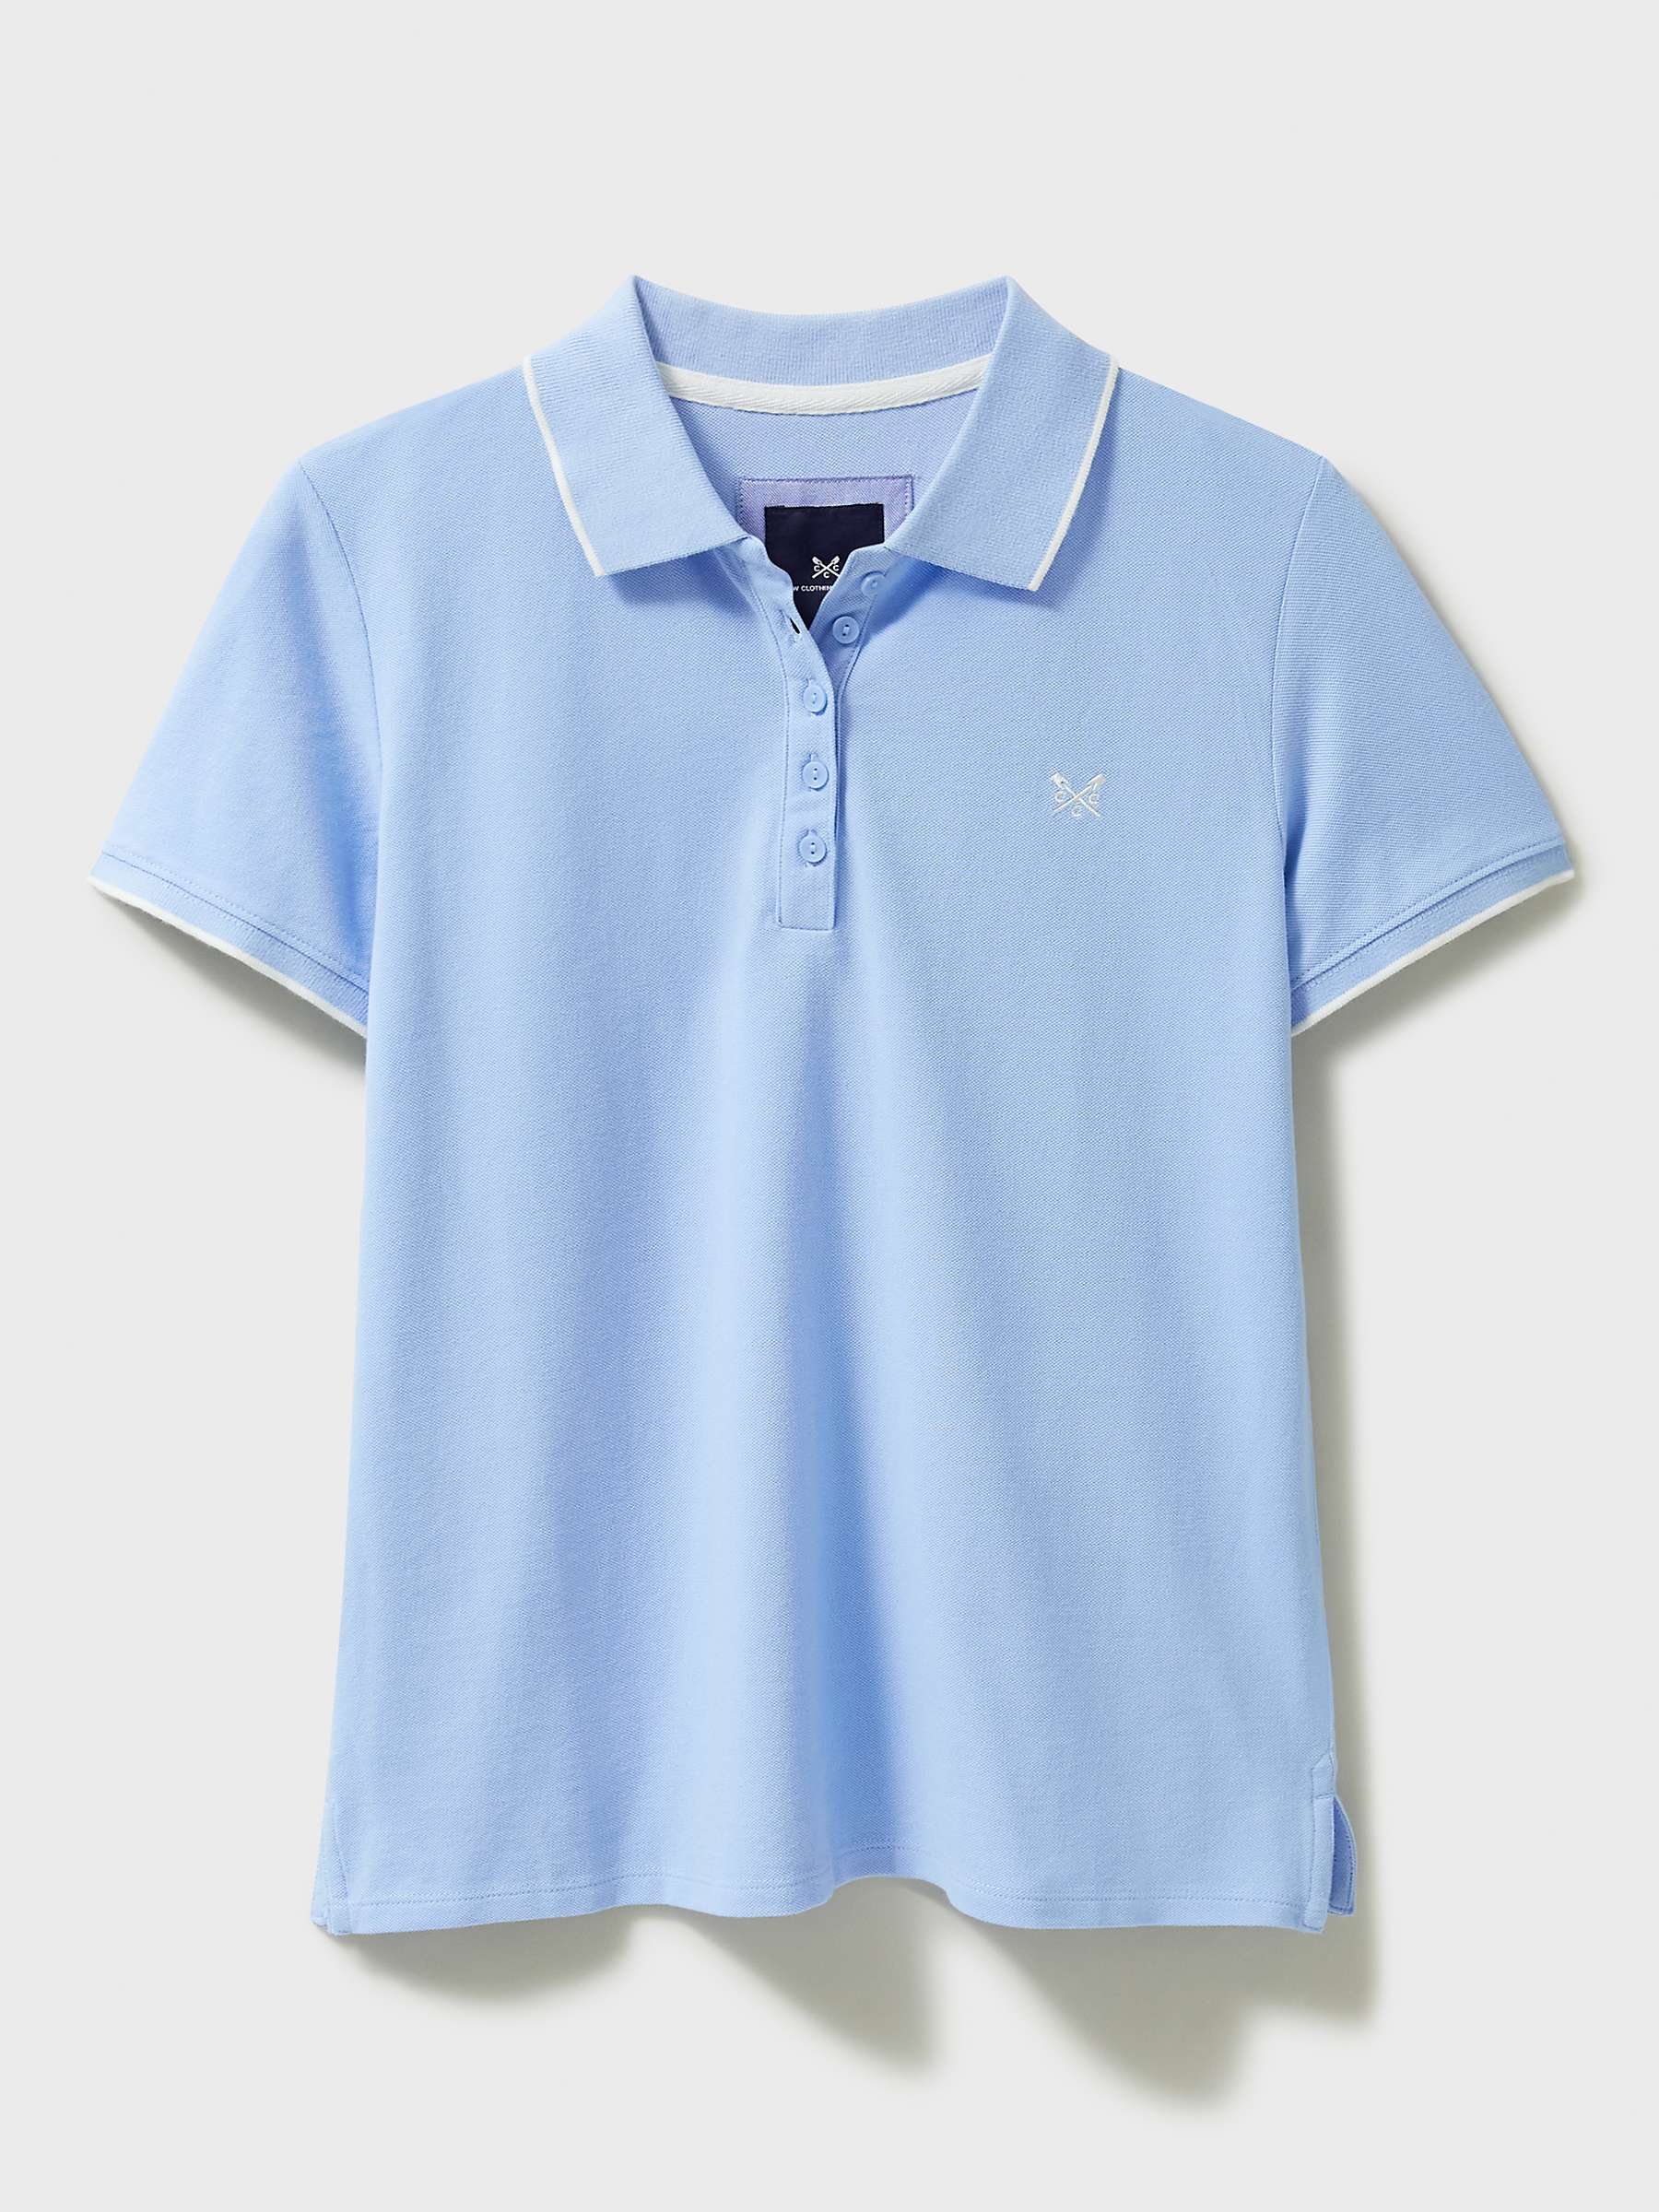 Buy Crew Clothing Classic Short Sleeve Polo Top Online at johnlewis.com